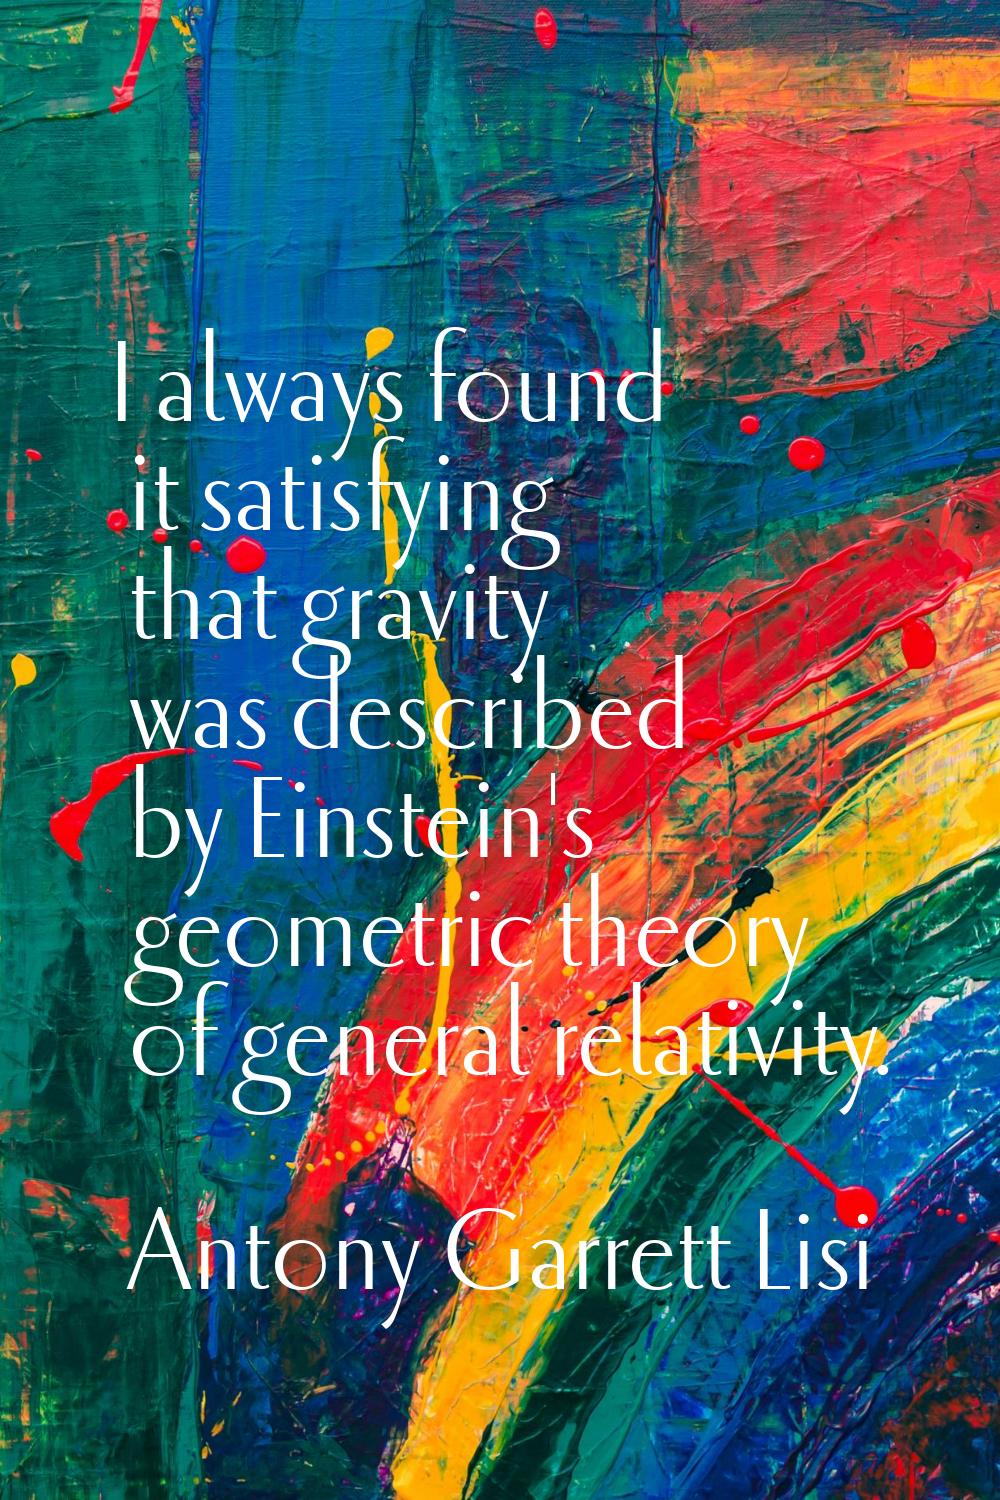 I always found it satisfying that gravity was described by Einstein's geometric theory of general r